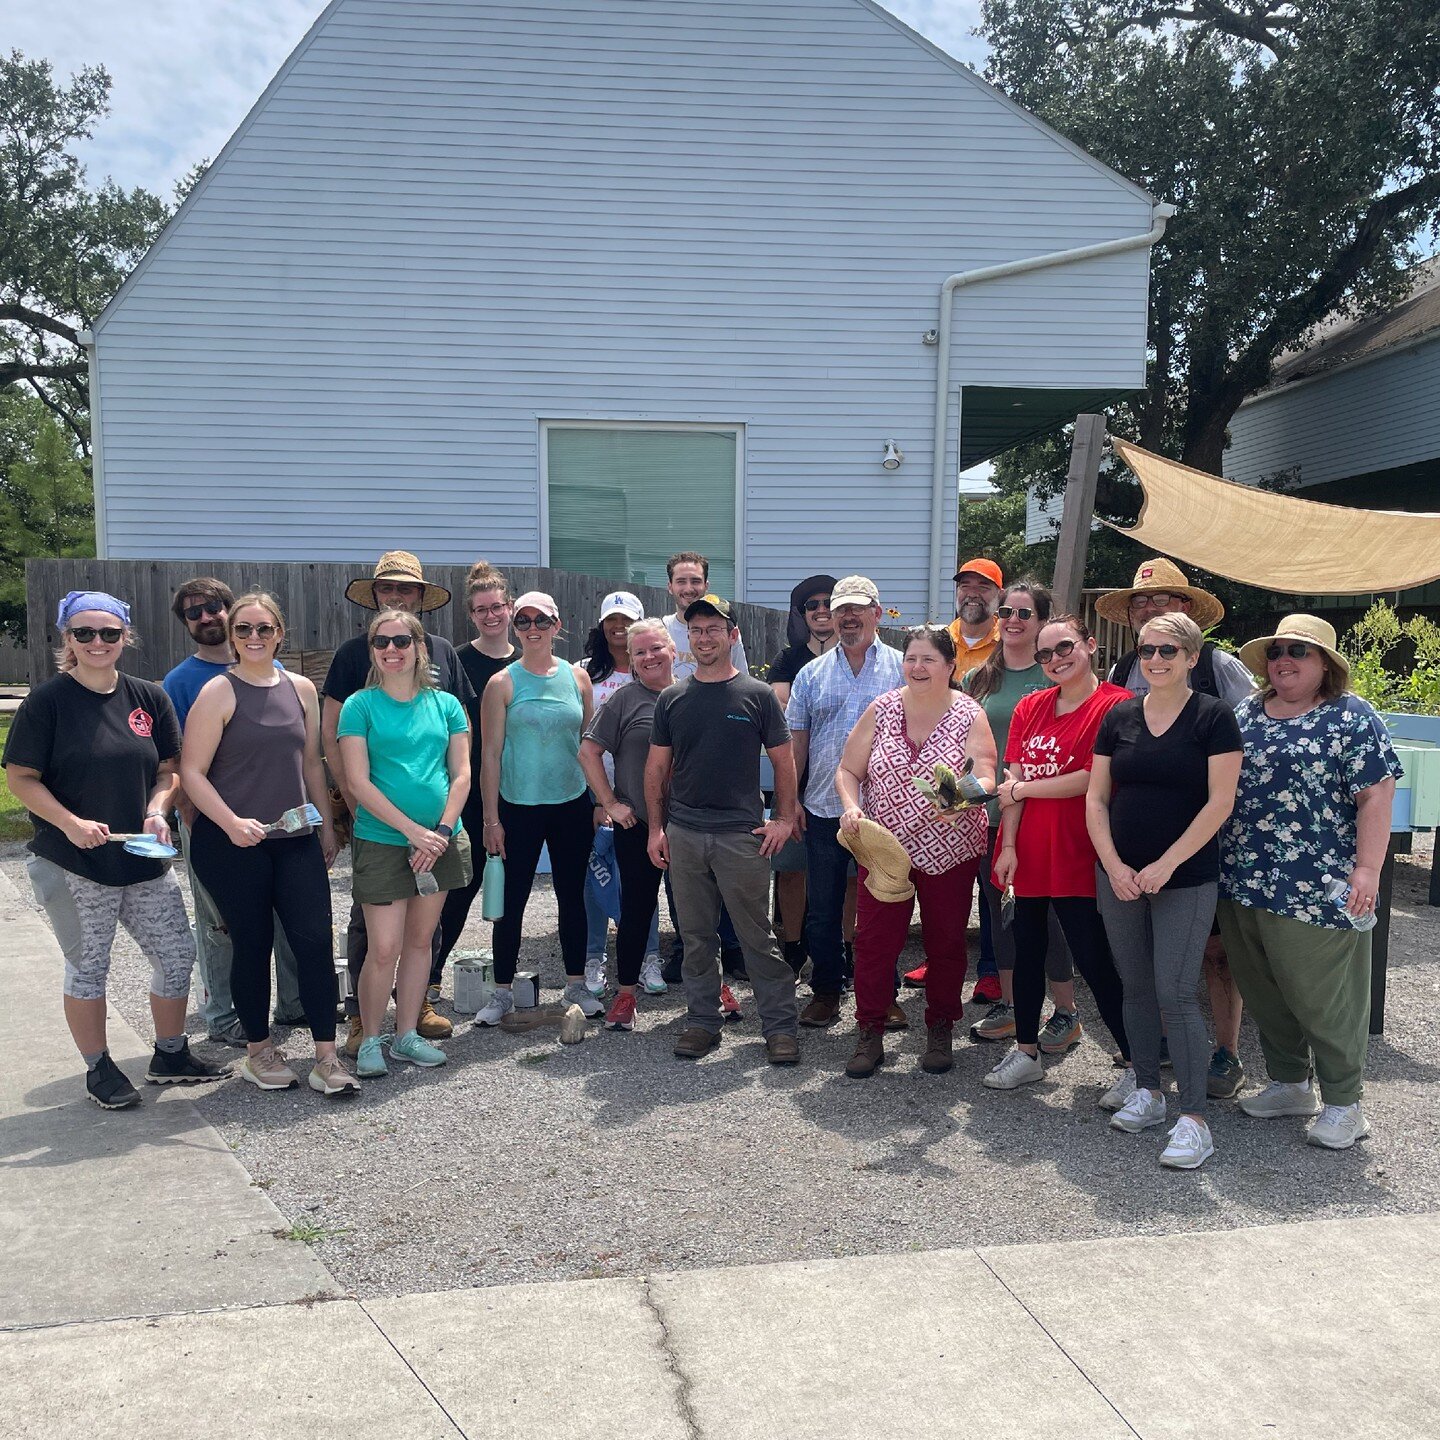 Last Friday, our team took to working outside with Bastion Community of Resilience and The Nola Tree Project! We spent the day gardening and learning about the incredible work Bastion offers to support and rehabilitate our veterans. We are grateful f